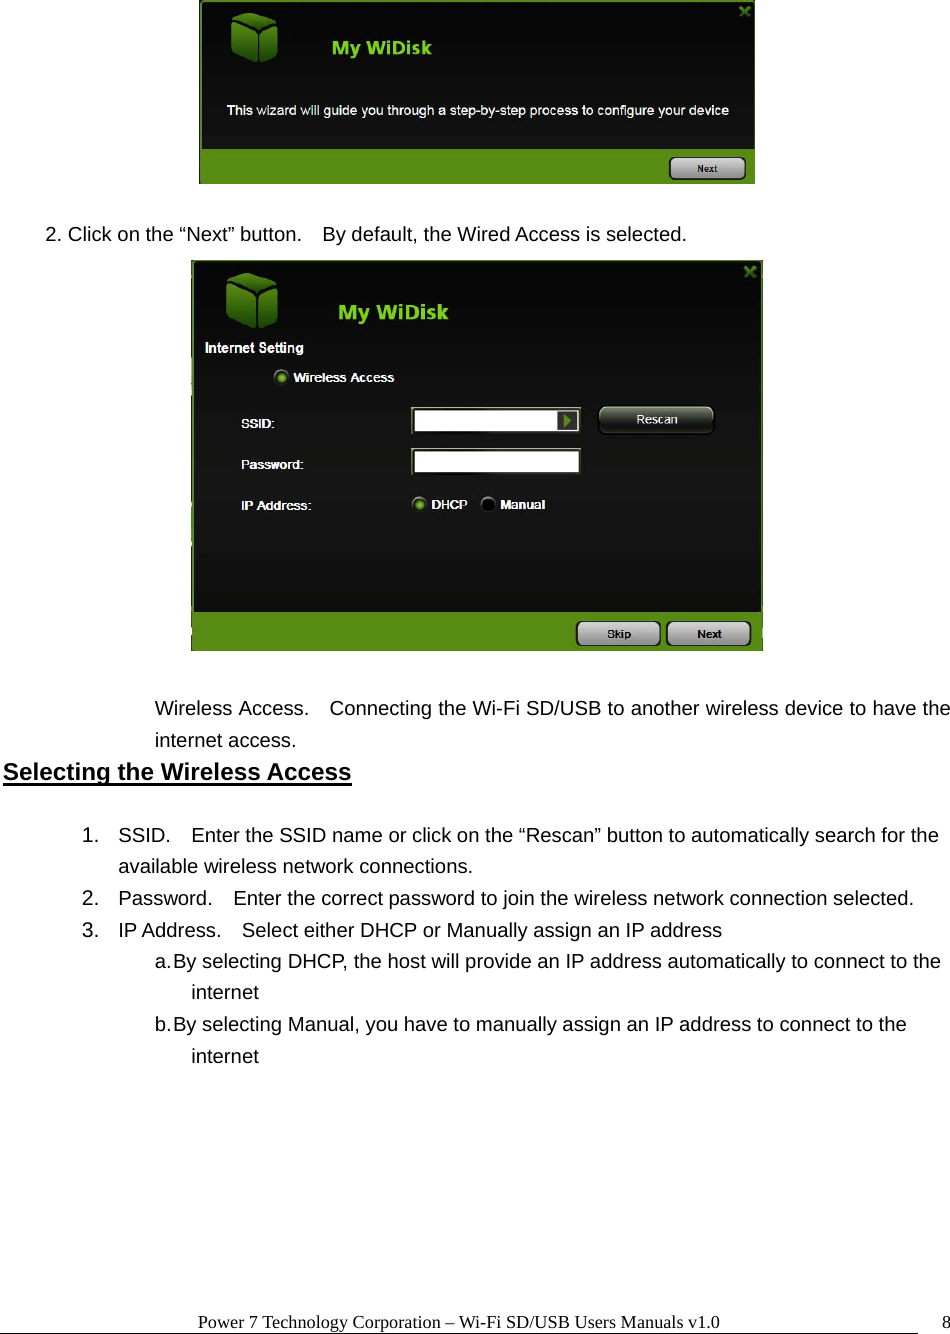 Power 7 Technology Corporation – Wi-Fi SD/USB Users Manuals v1.0  8  2. Click on the “Next” button.    By default, the Wired Access is selected.   Wireless Access.    Connecting the Wi-Fi SD/USB to another wireless device to have the internet access. Selecting the Wireless Access  1.  SSID.    Enter the SSID name or click on the “Rescan” button to automatically search for the available wireless network connections. 2.  Password.    Enter the correct password to join the wireless network connection selected.     3.  IP Address.    Select either DHCP or Manually assign an IP address a. By selecting DHCP, the host will provide an IP address automatically to connect to the internet b. By selecting Manual, you have to manually assign an IP address to connect to the internet   